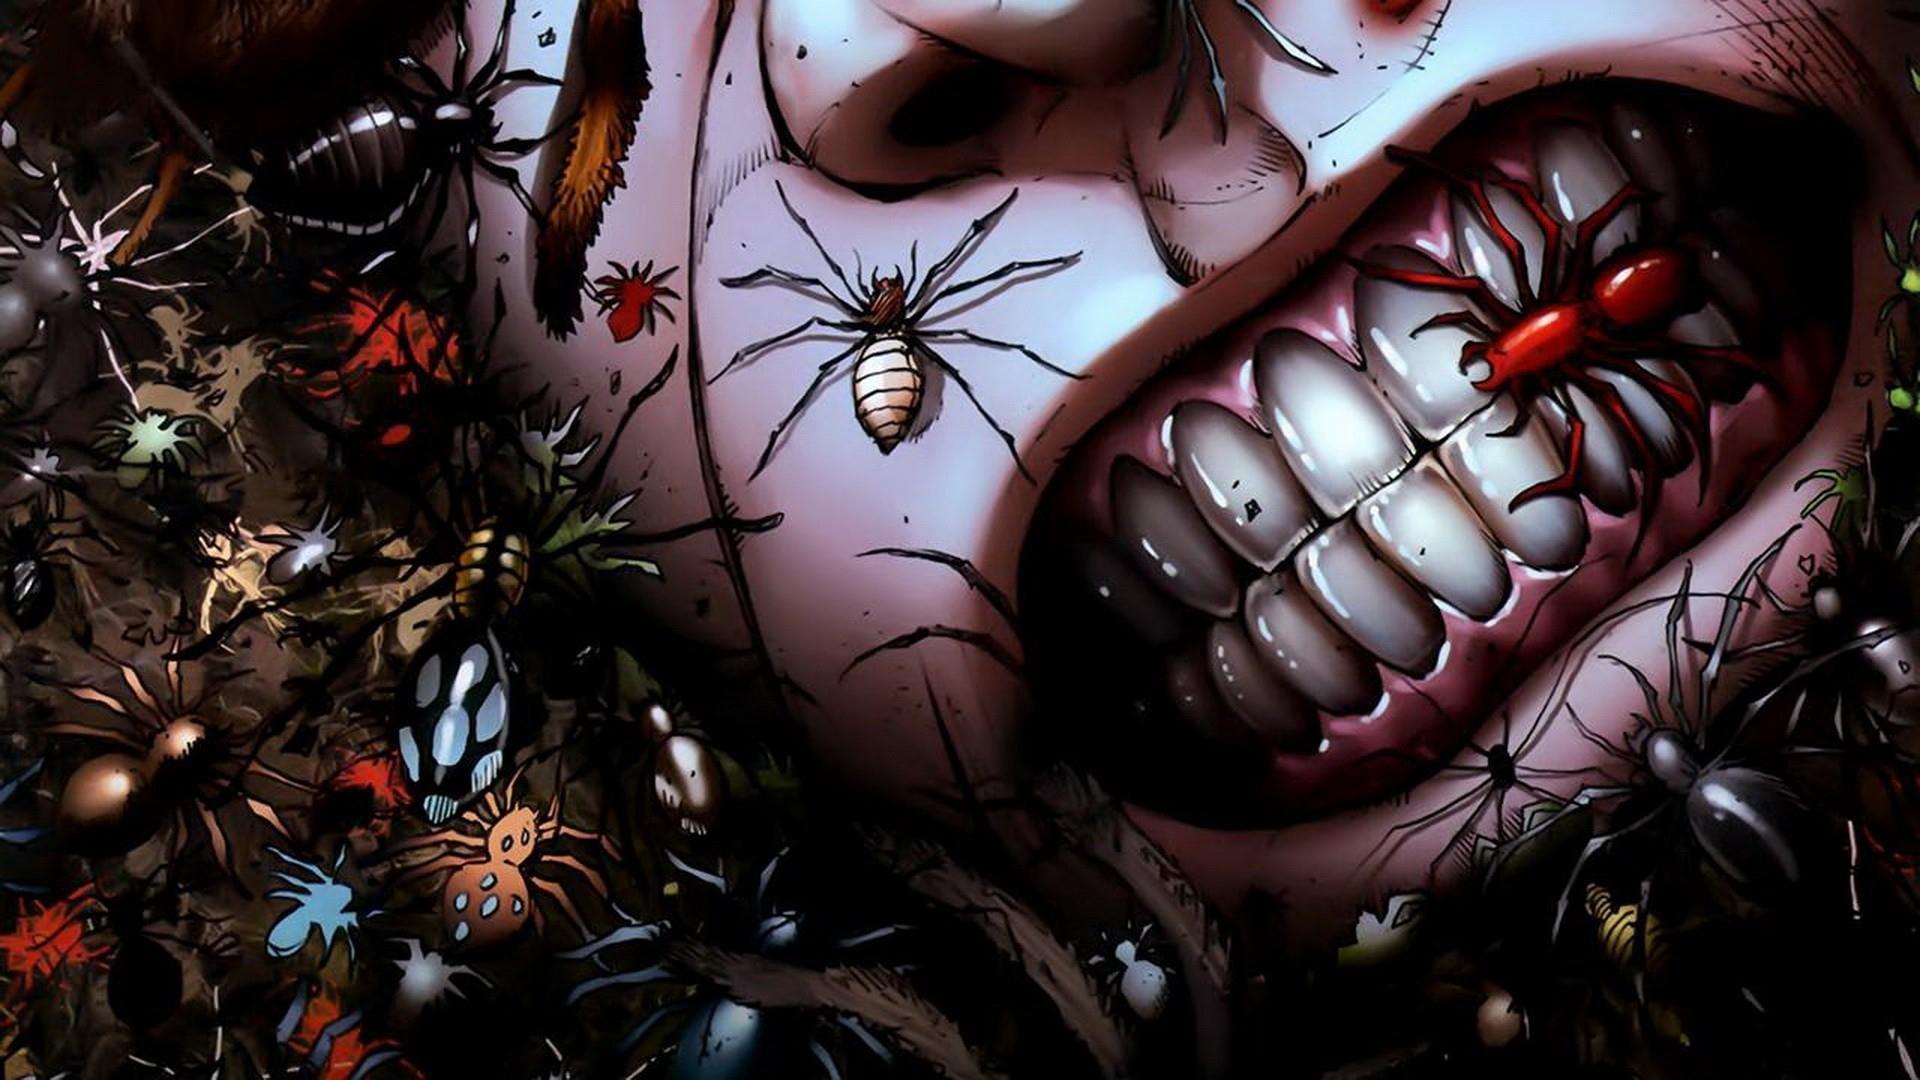 Grimm Fairy Tales Comics Anime Dark Horror Insects Spider Grimace